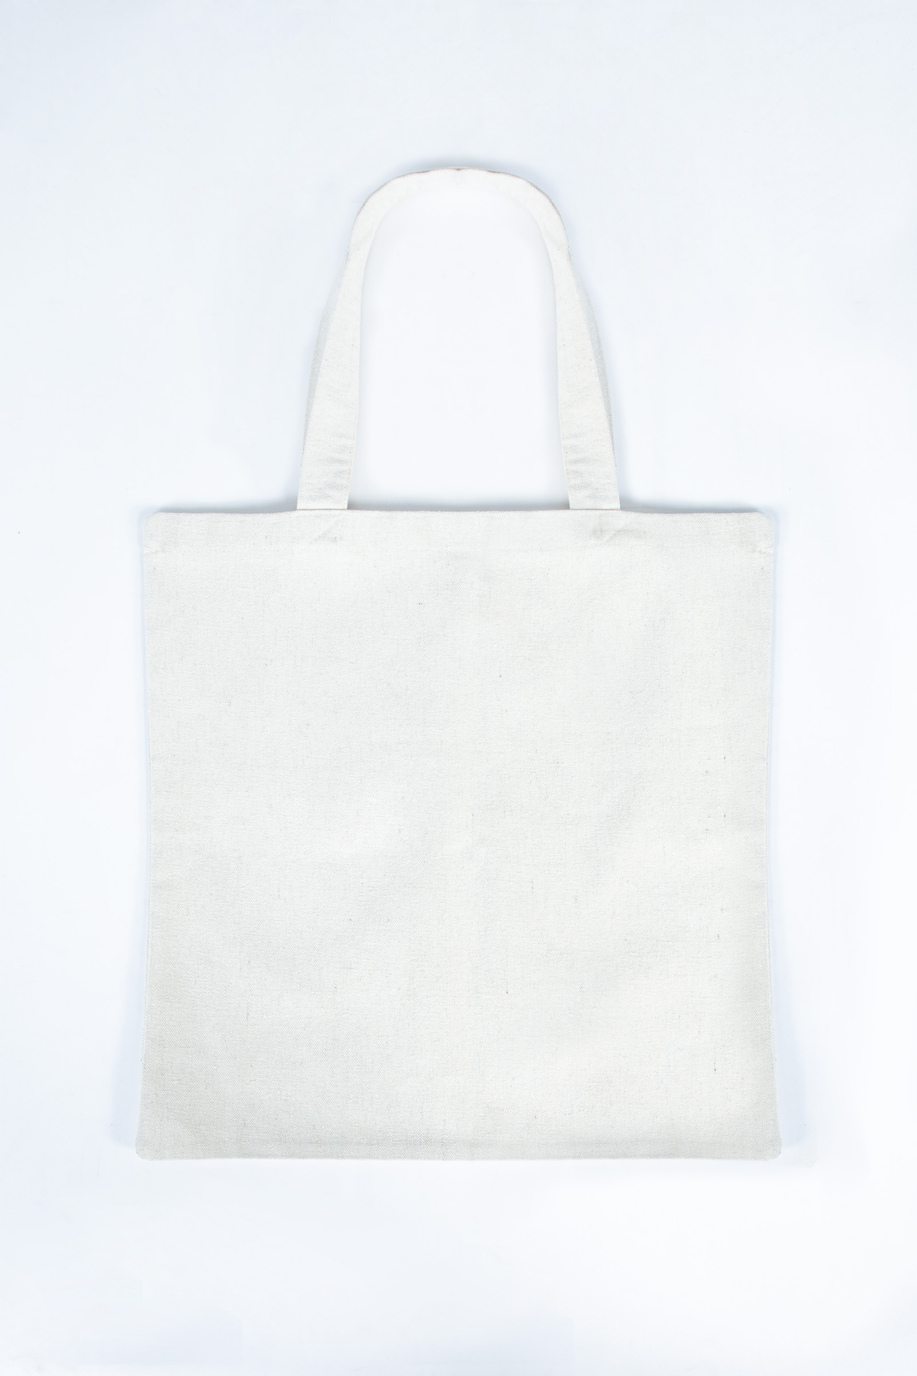 Unisex canvas tote bag with double handles - Gifts under CHF 85 for her | La Martina - Official Online Shop